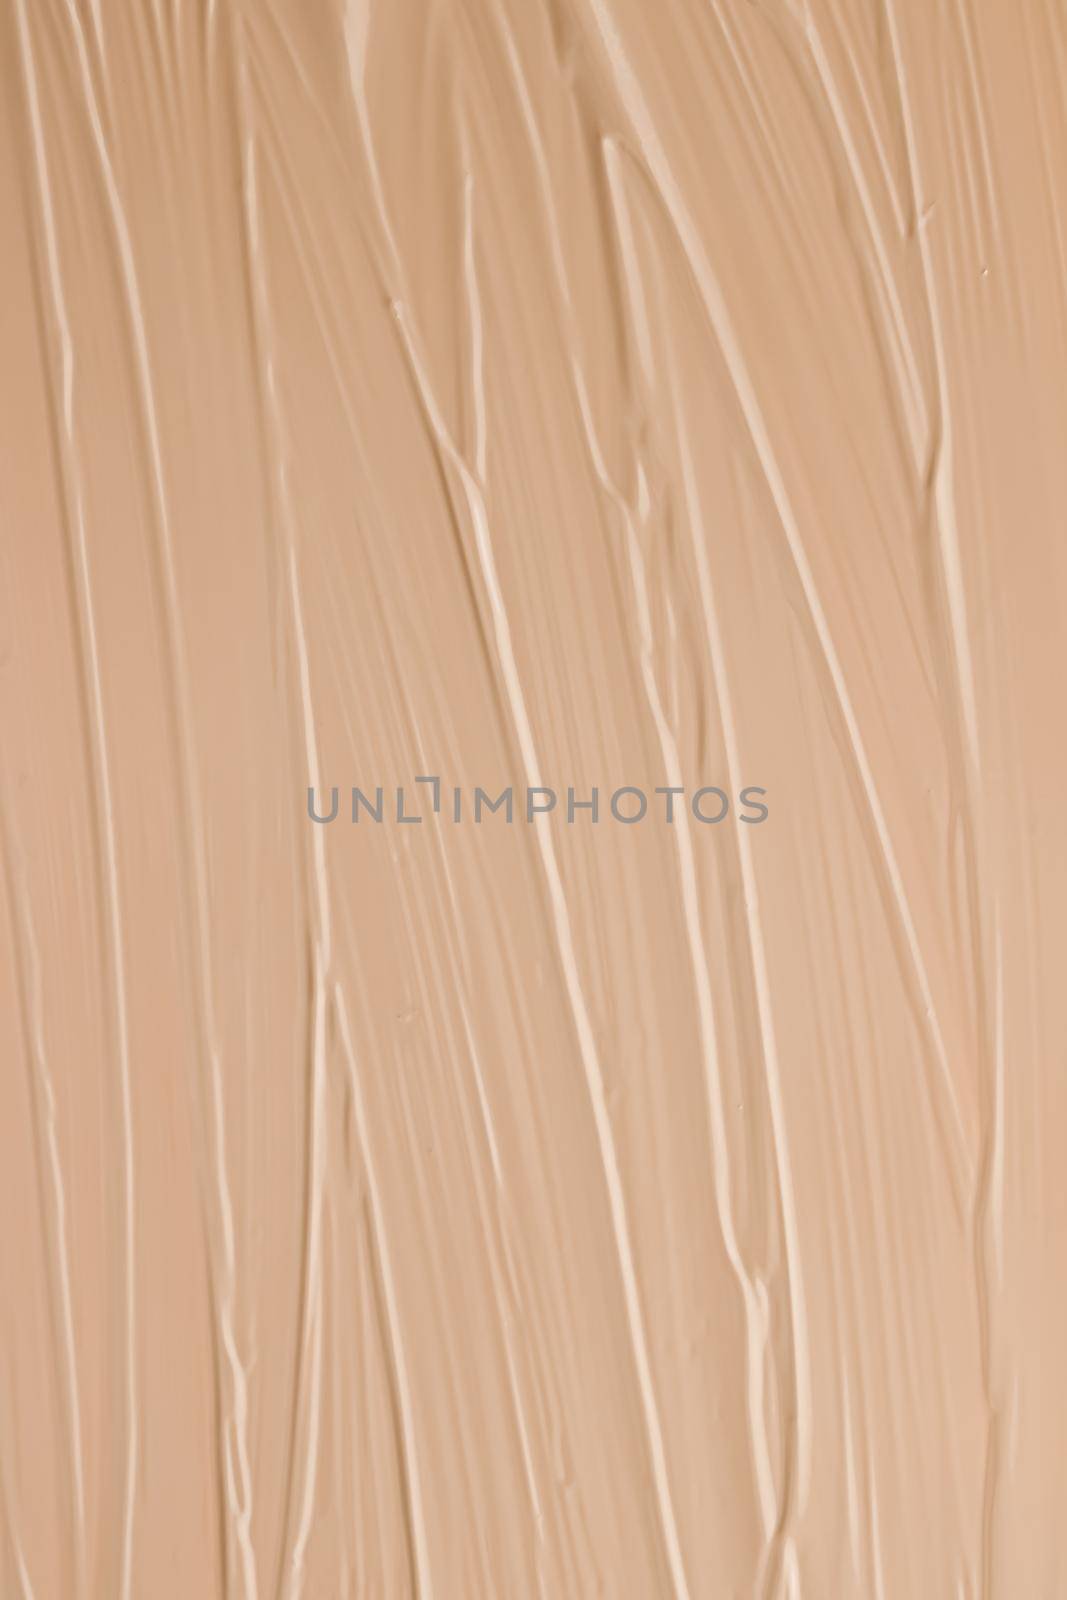 Beige cosmetic texture background, make-up and skincare cosmetics product, cream, lipstick, foundation macro as luxury beauty brand, holiday flatlay design by Anneleven